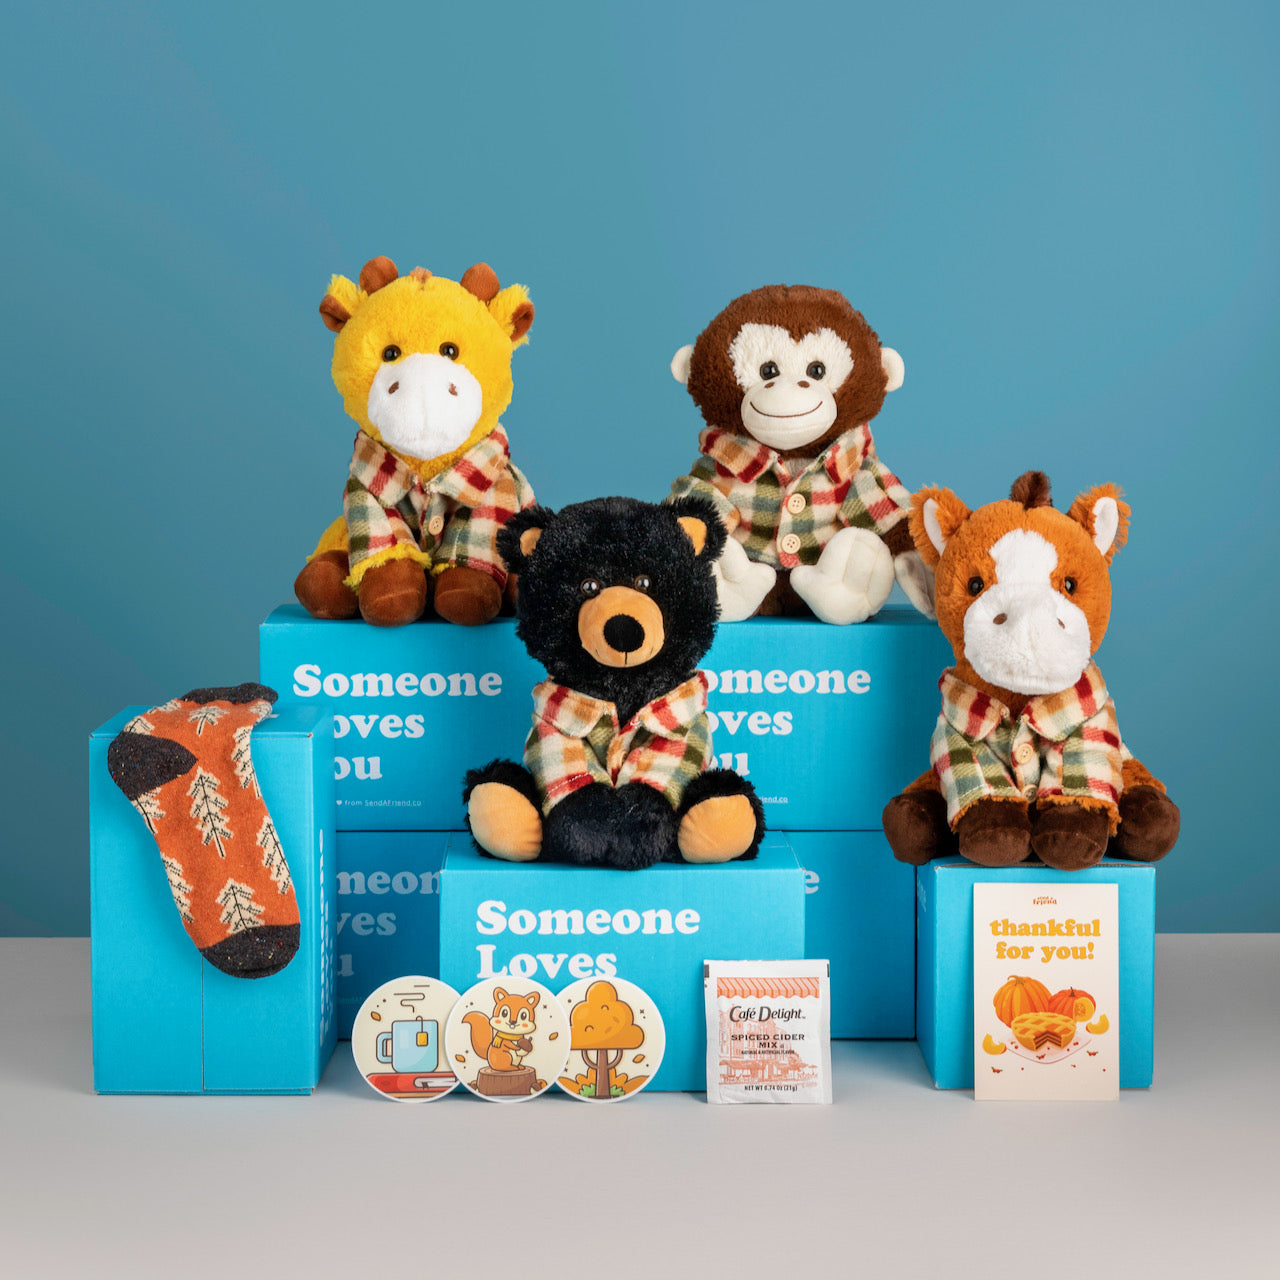 An array of stuffed animals, stickers, socks and cards from SendAFriend.